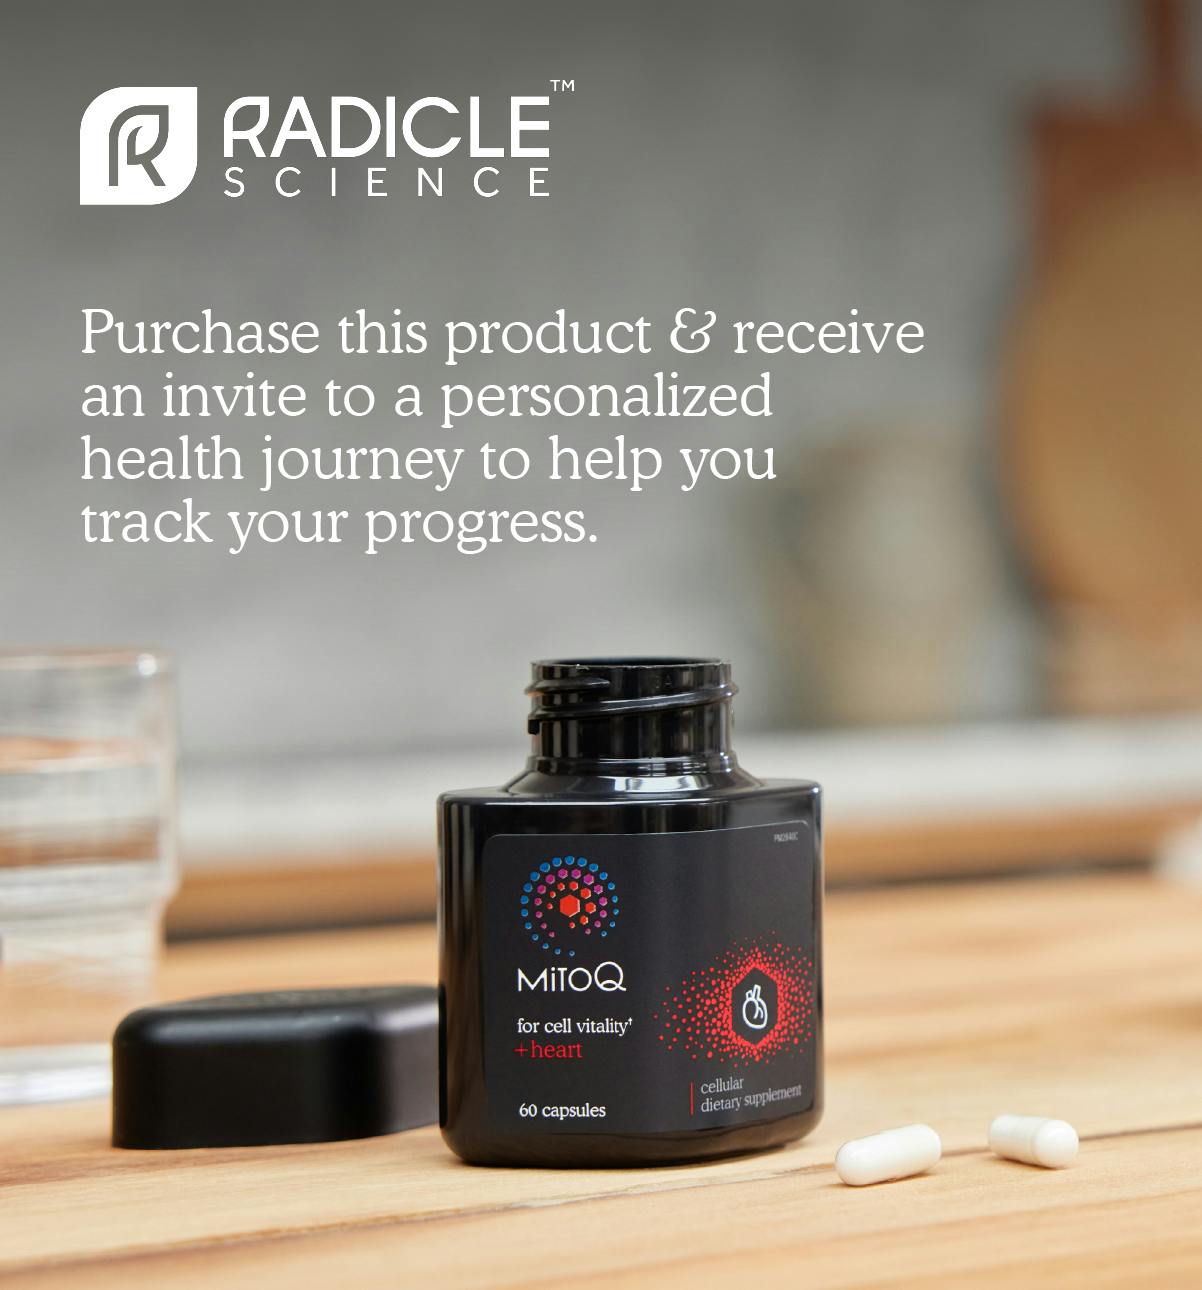 MitoQ +heart purchase for invite to personalised journey to help track progress